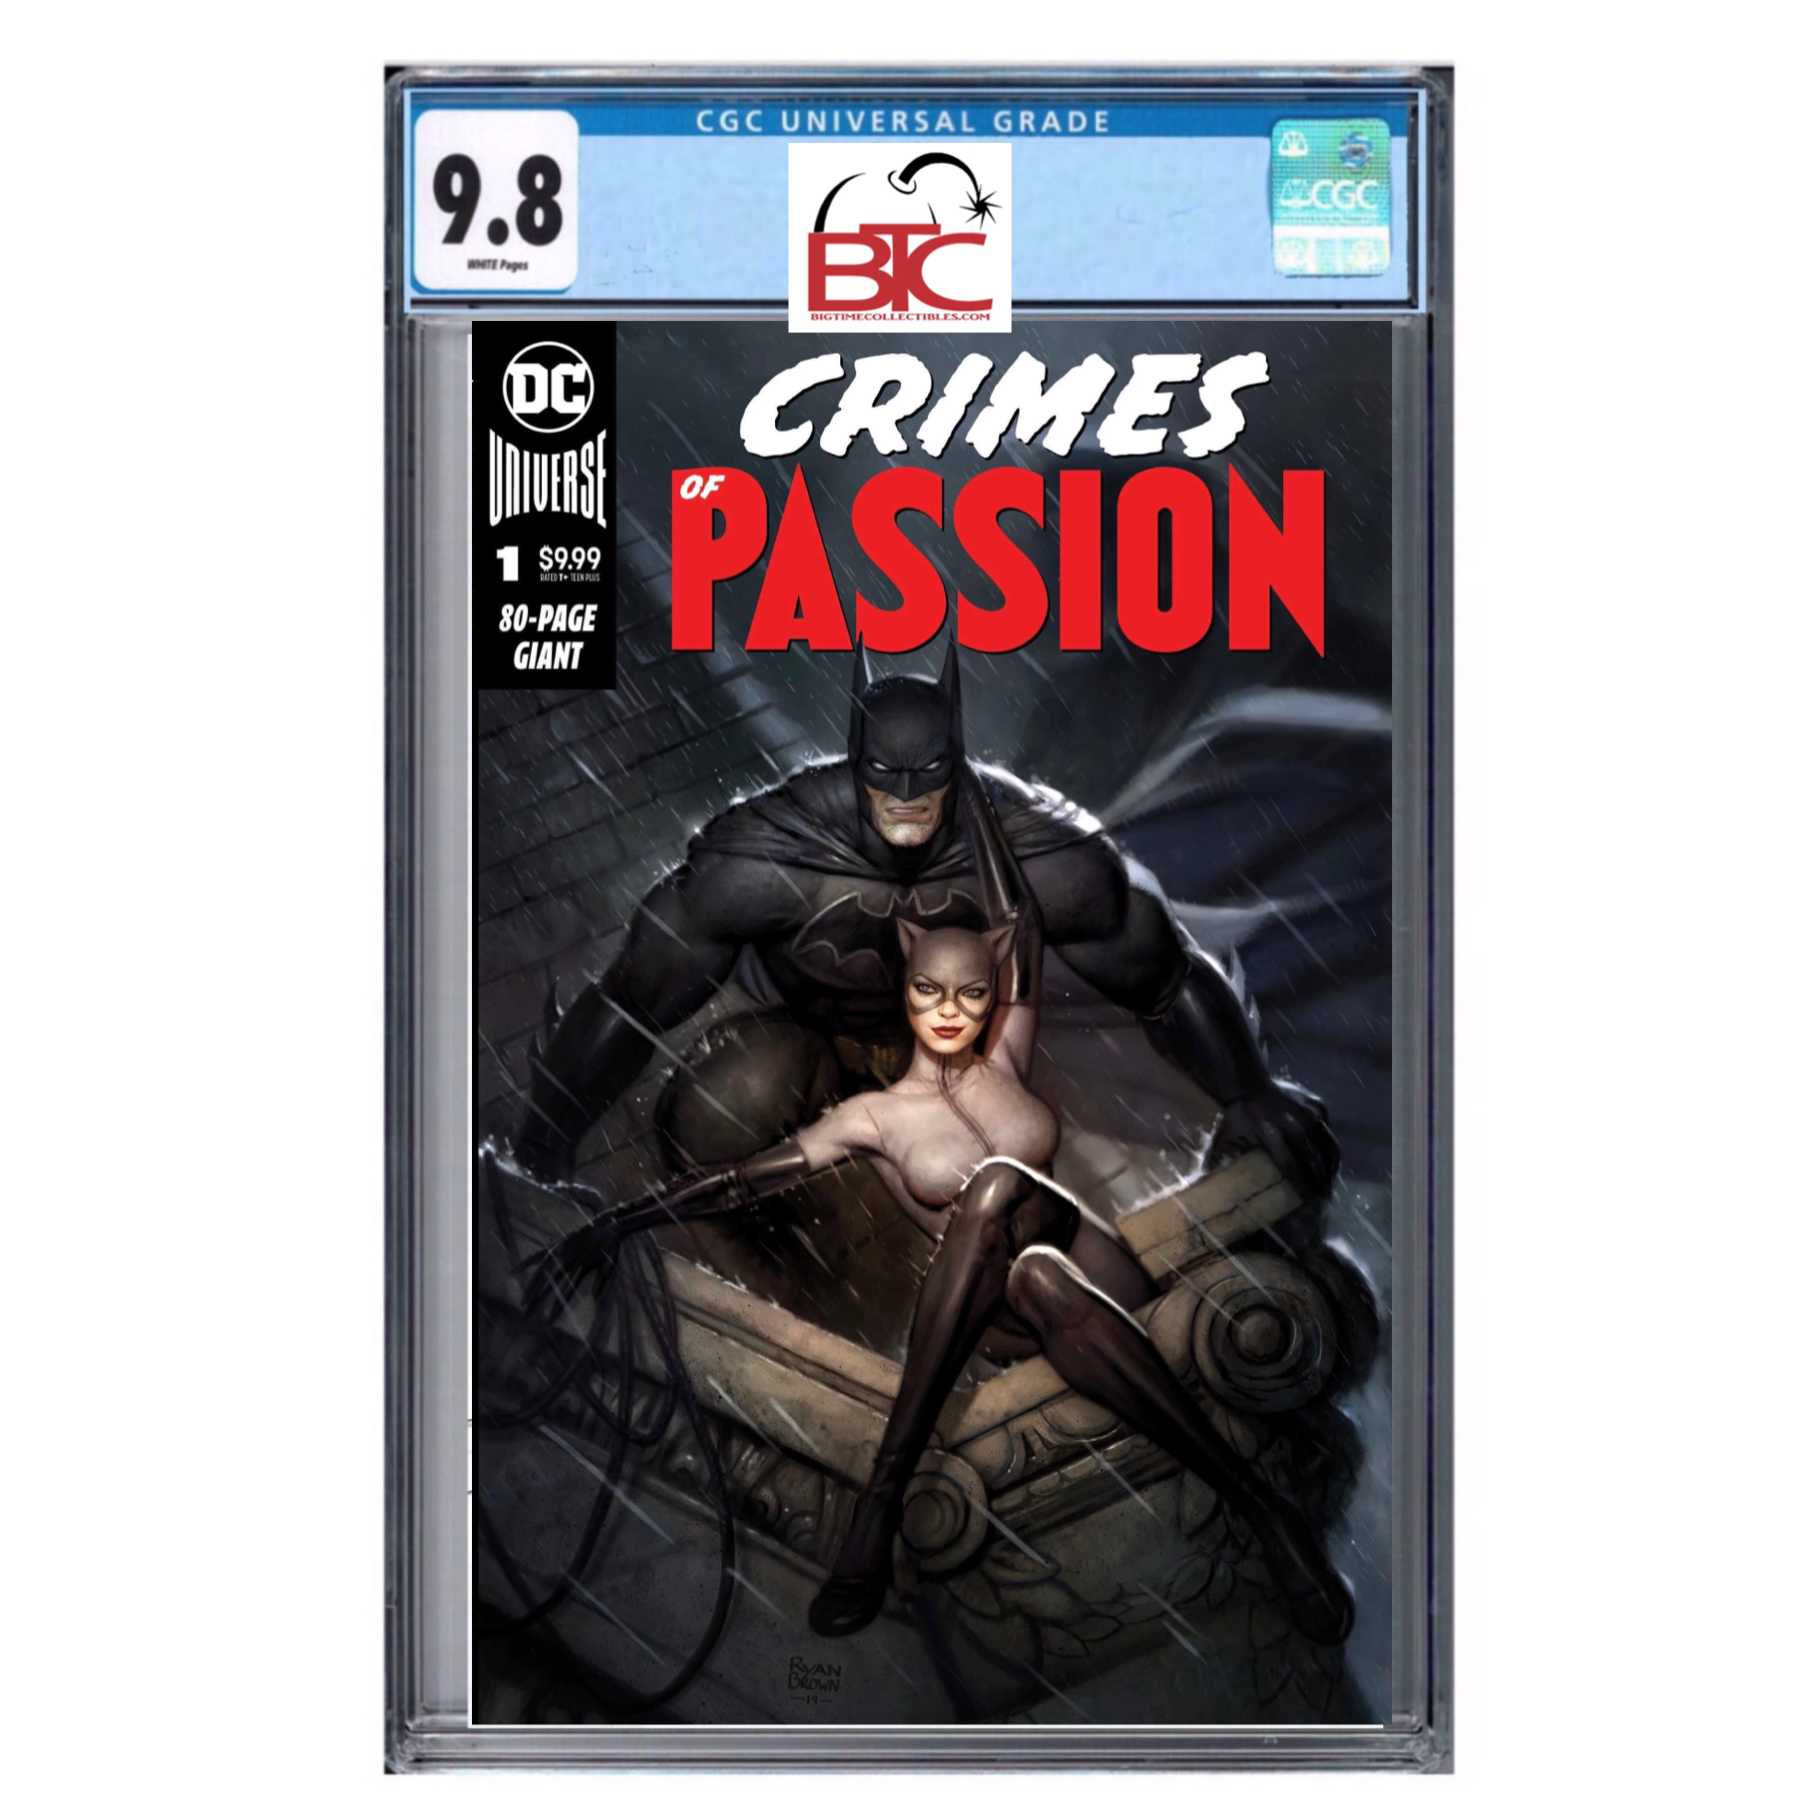 DC CRIMES OF PASSION #1 RYAN BROWN EXCLUSIVE VARIANT COVER OPTION